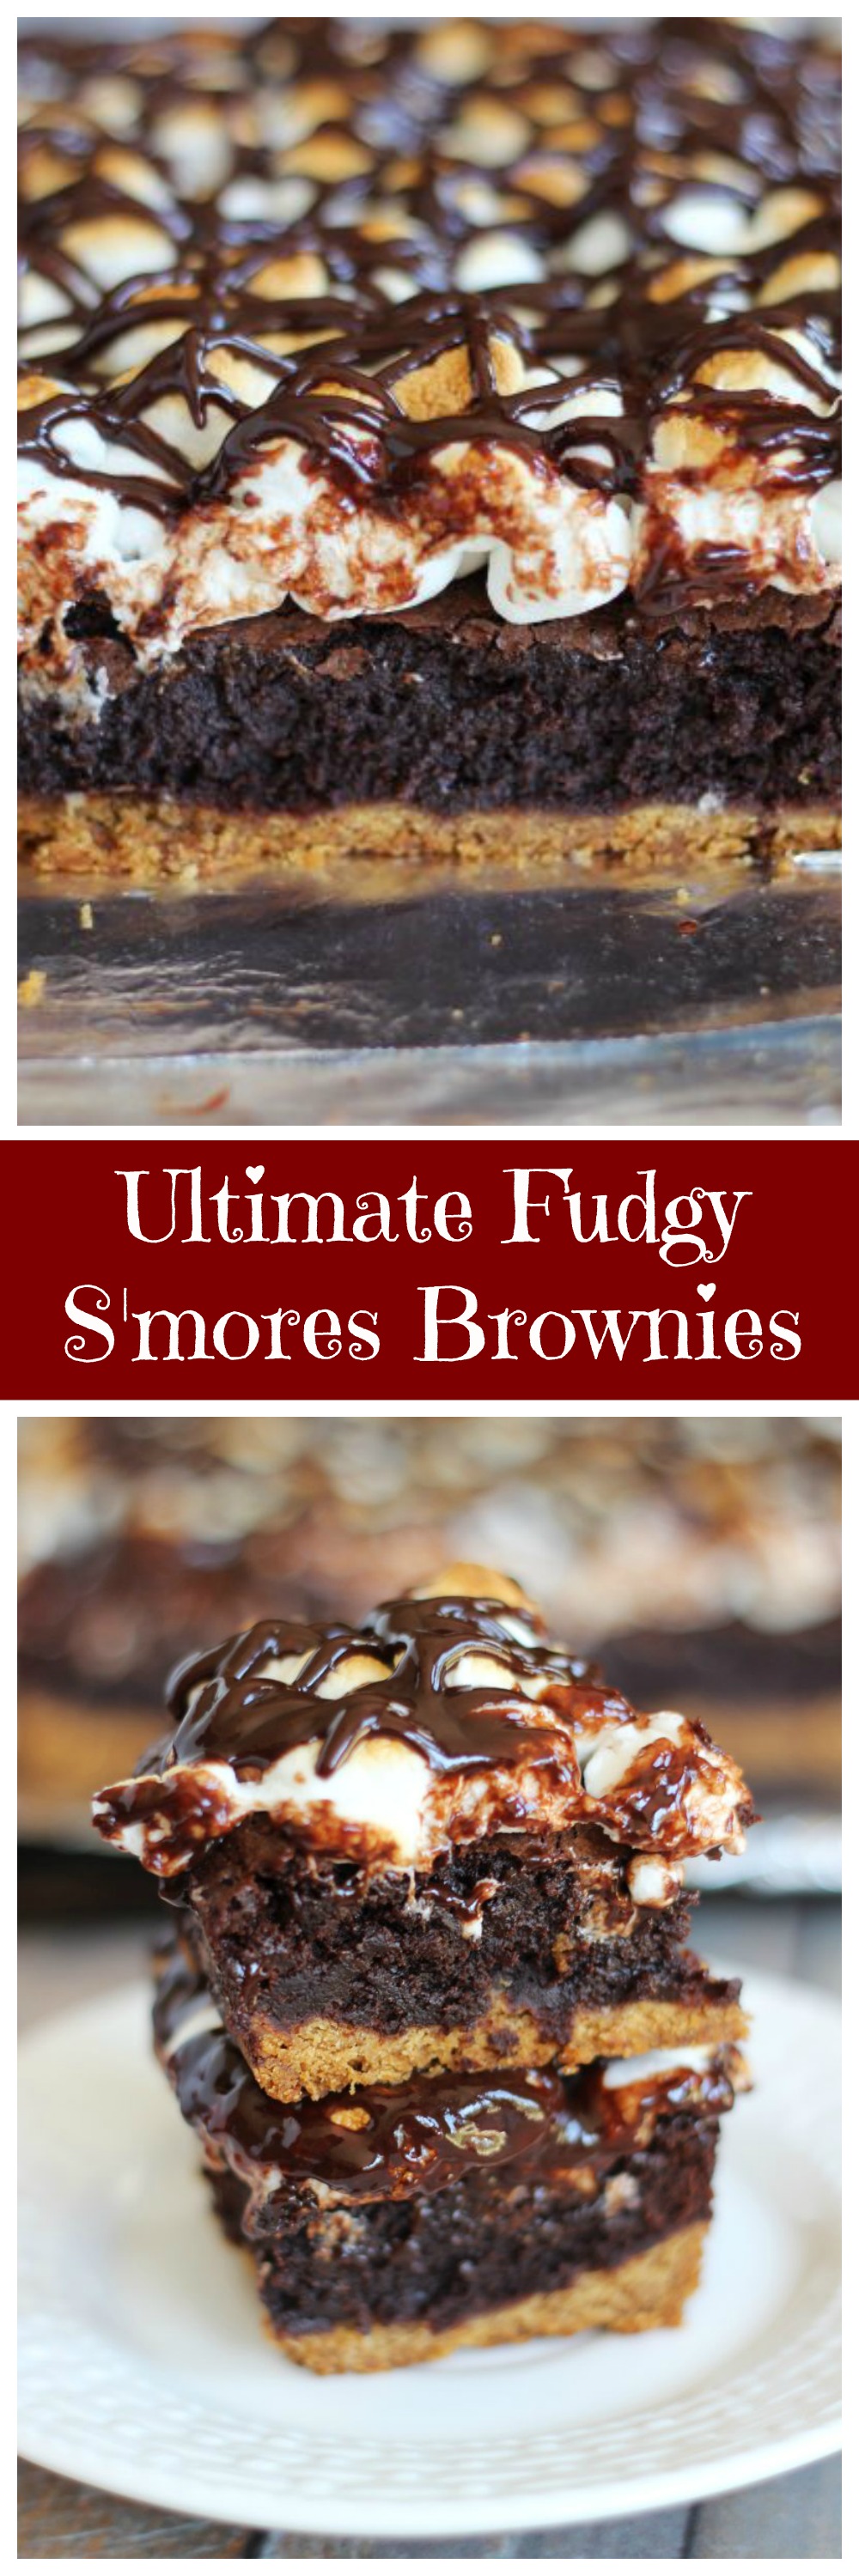 Ultimate Fudgy S'mores Brownies - The Gold Lining Girl